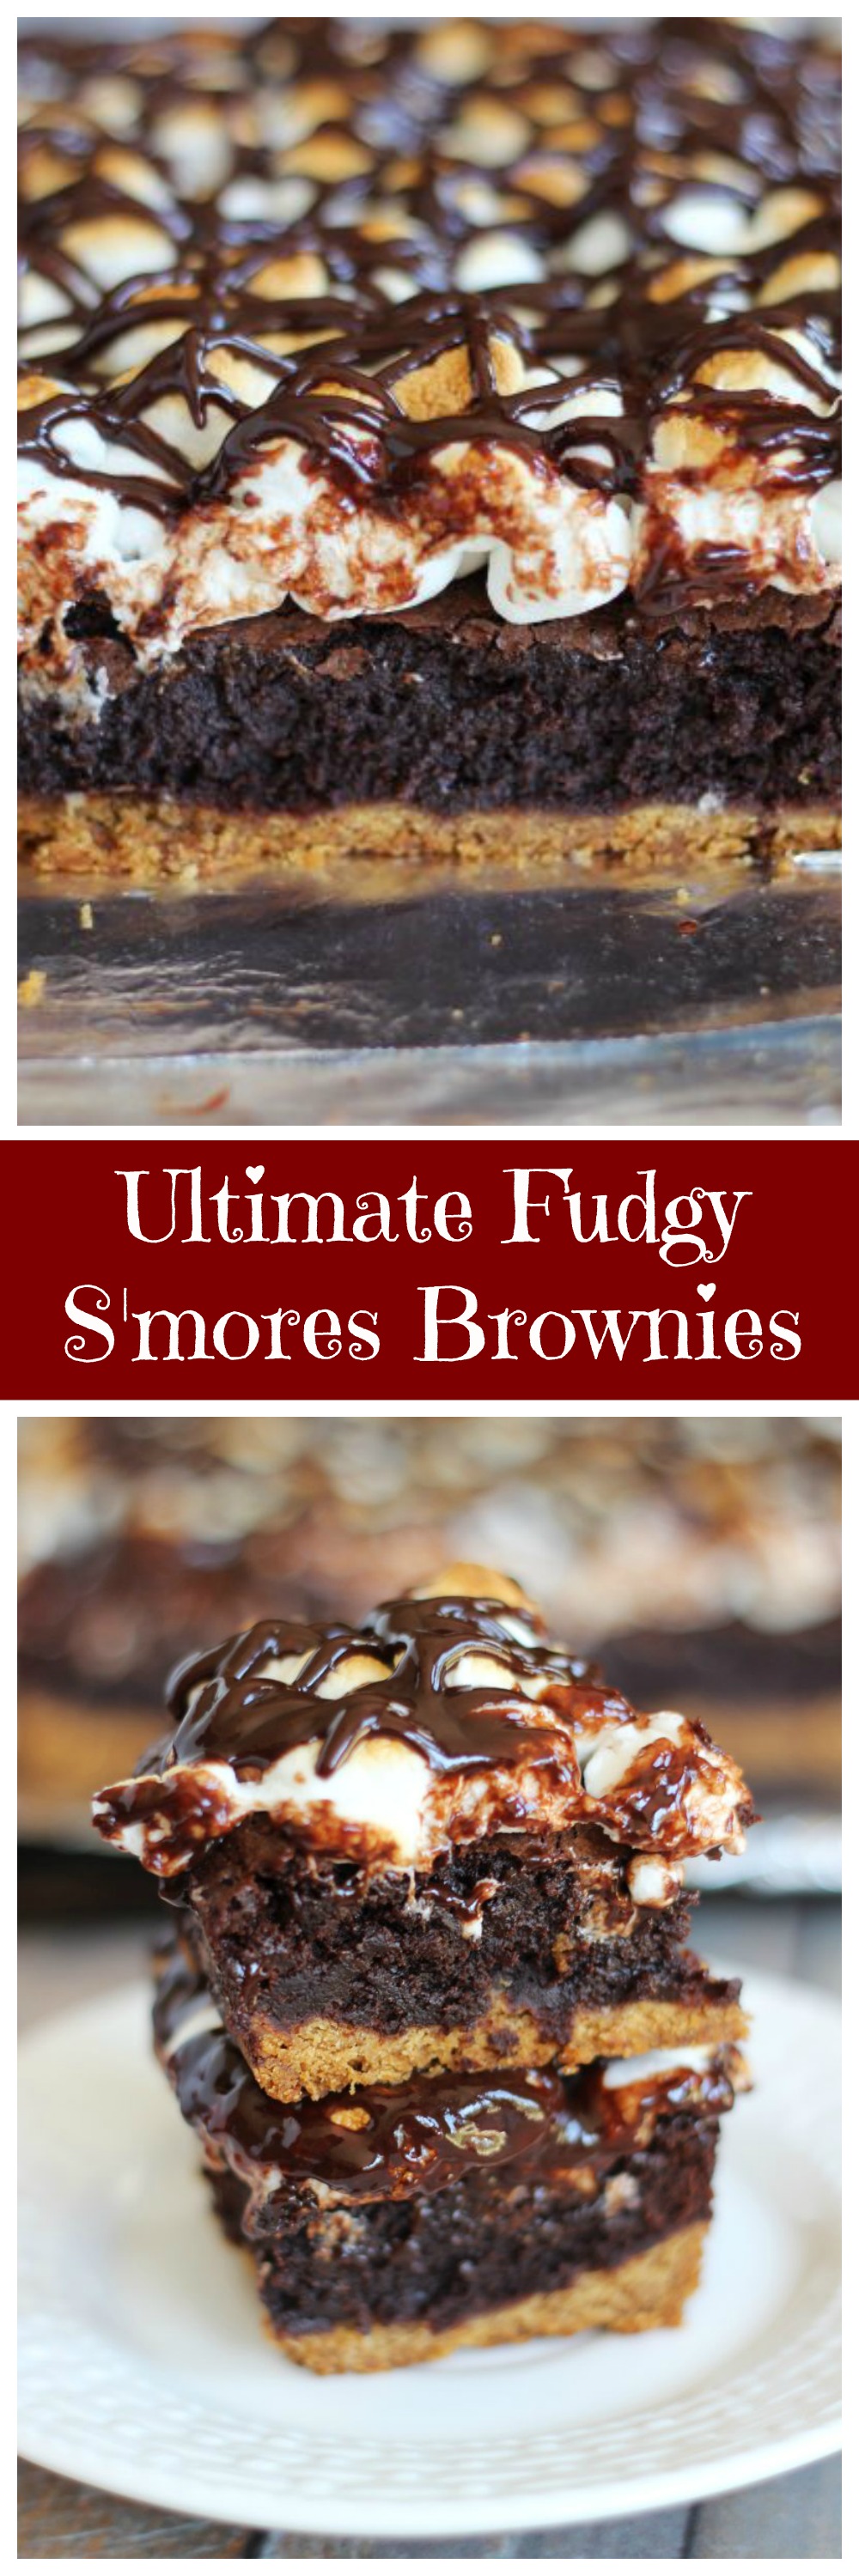 Ultimate Fudgy S'mores Brownies - The Gold Lining Girl